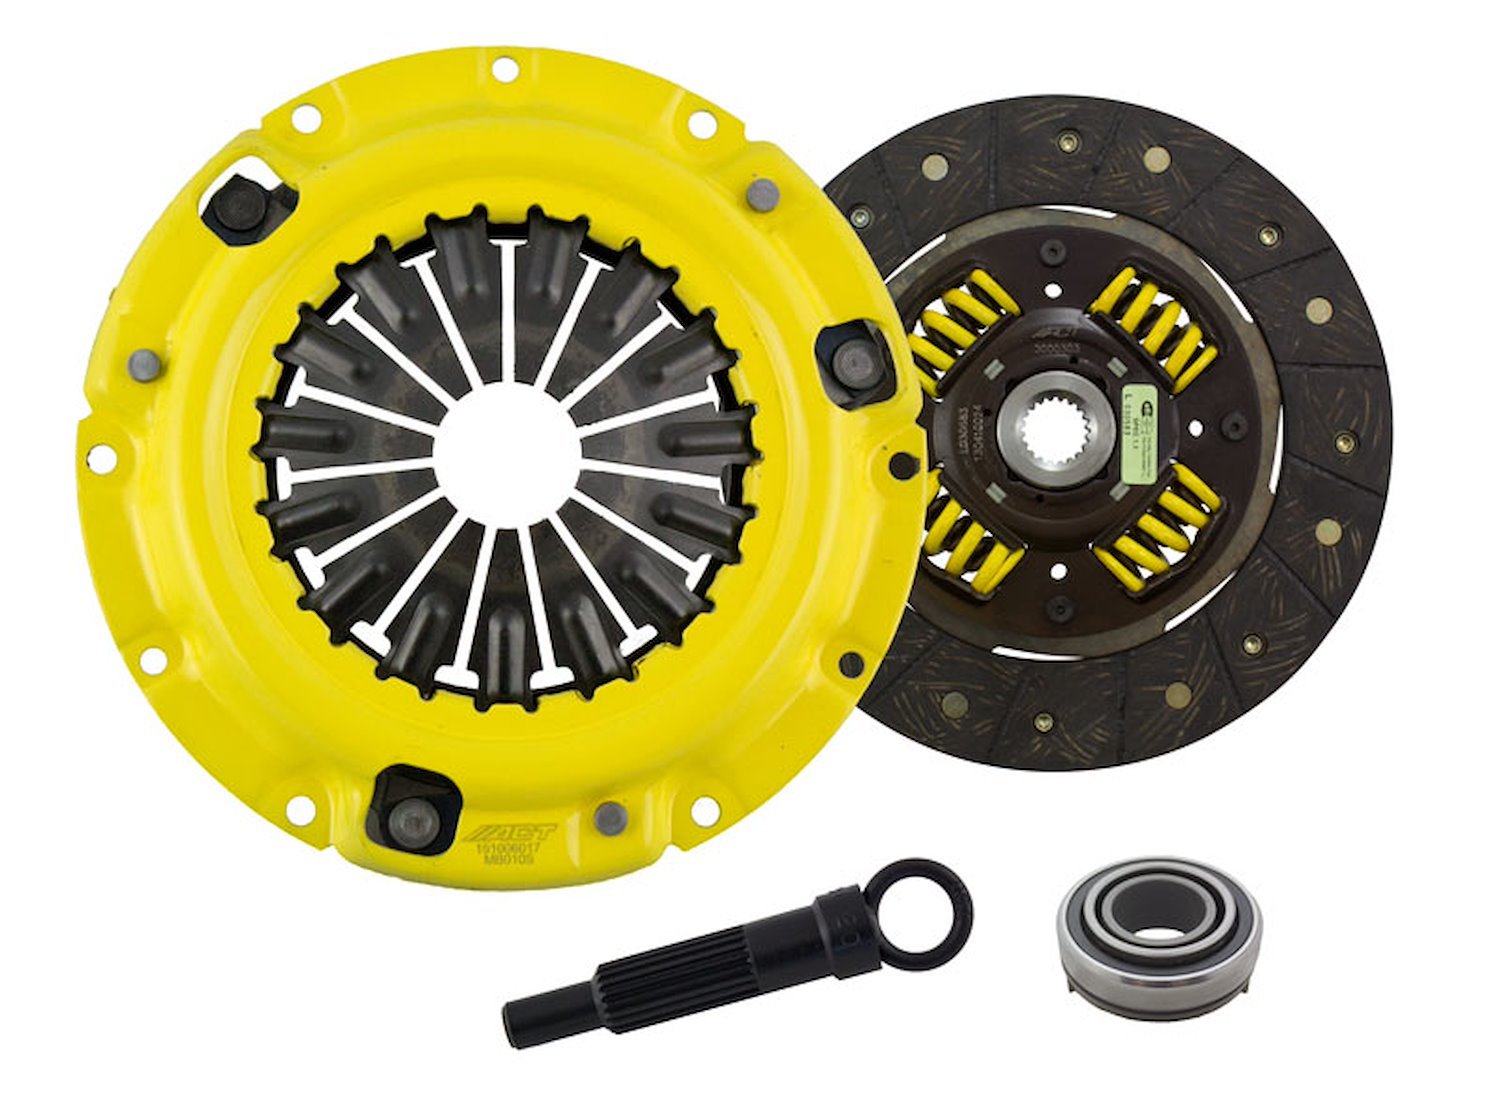 Sport/Performance Street Sprung Transmission Clutch Kit Fits Select Chrysler/Dodge/Eagle/Mitsubishi/Plymouth